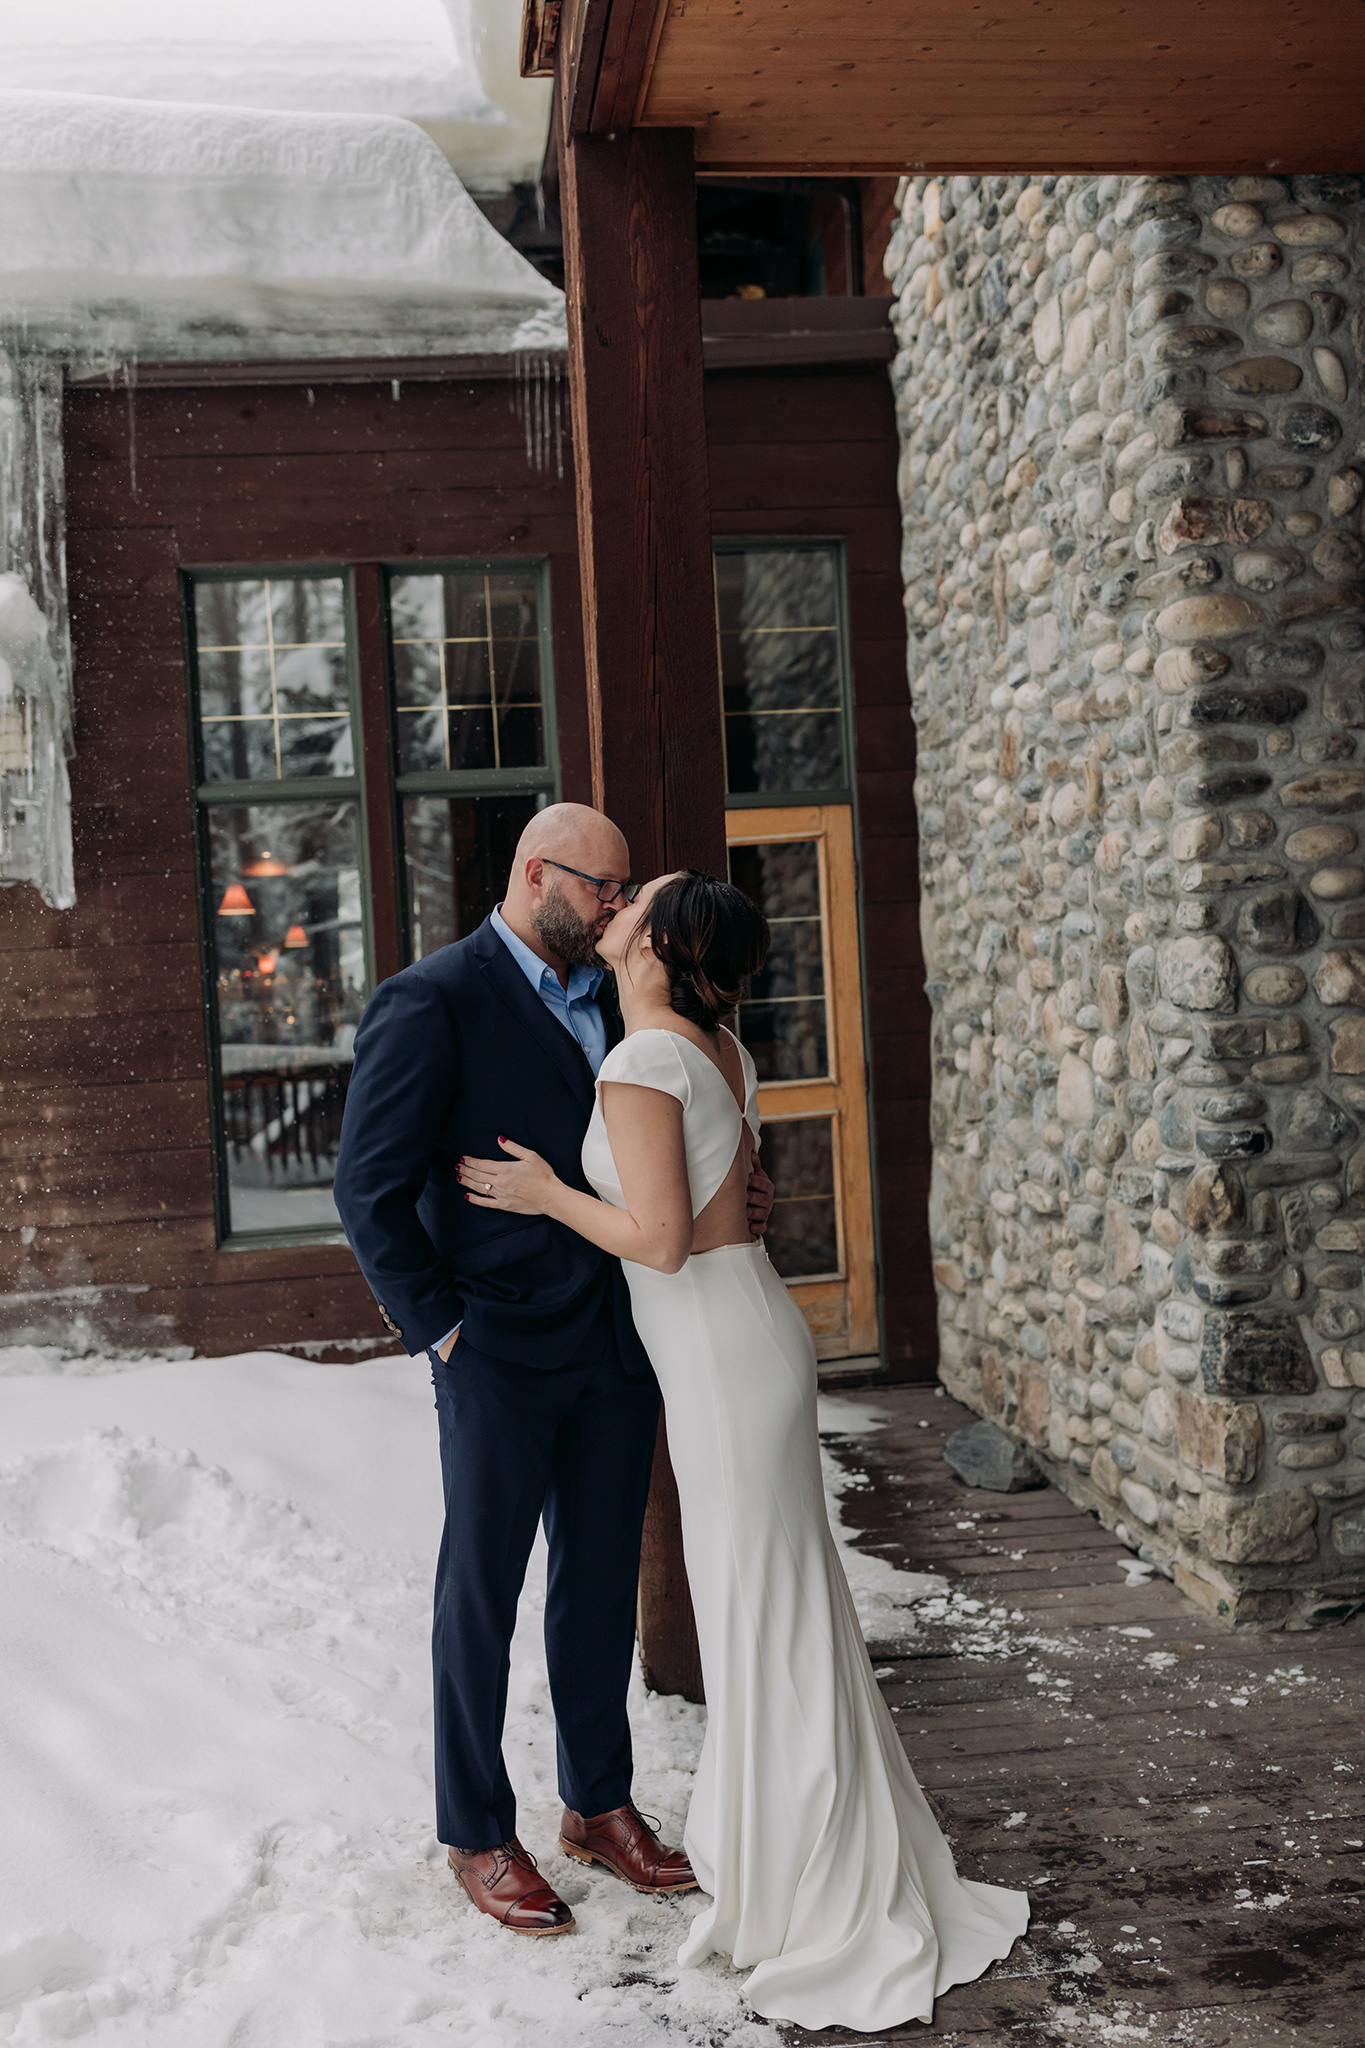 elopement Bride & Groom first Look on the deck at the Main lodge with icicles & falling snow photographed by mountain elopement & wedding photographer ENV Photography